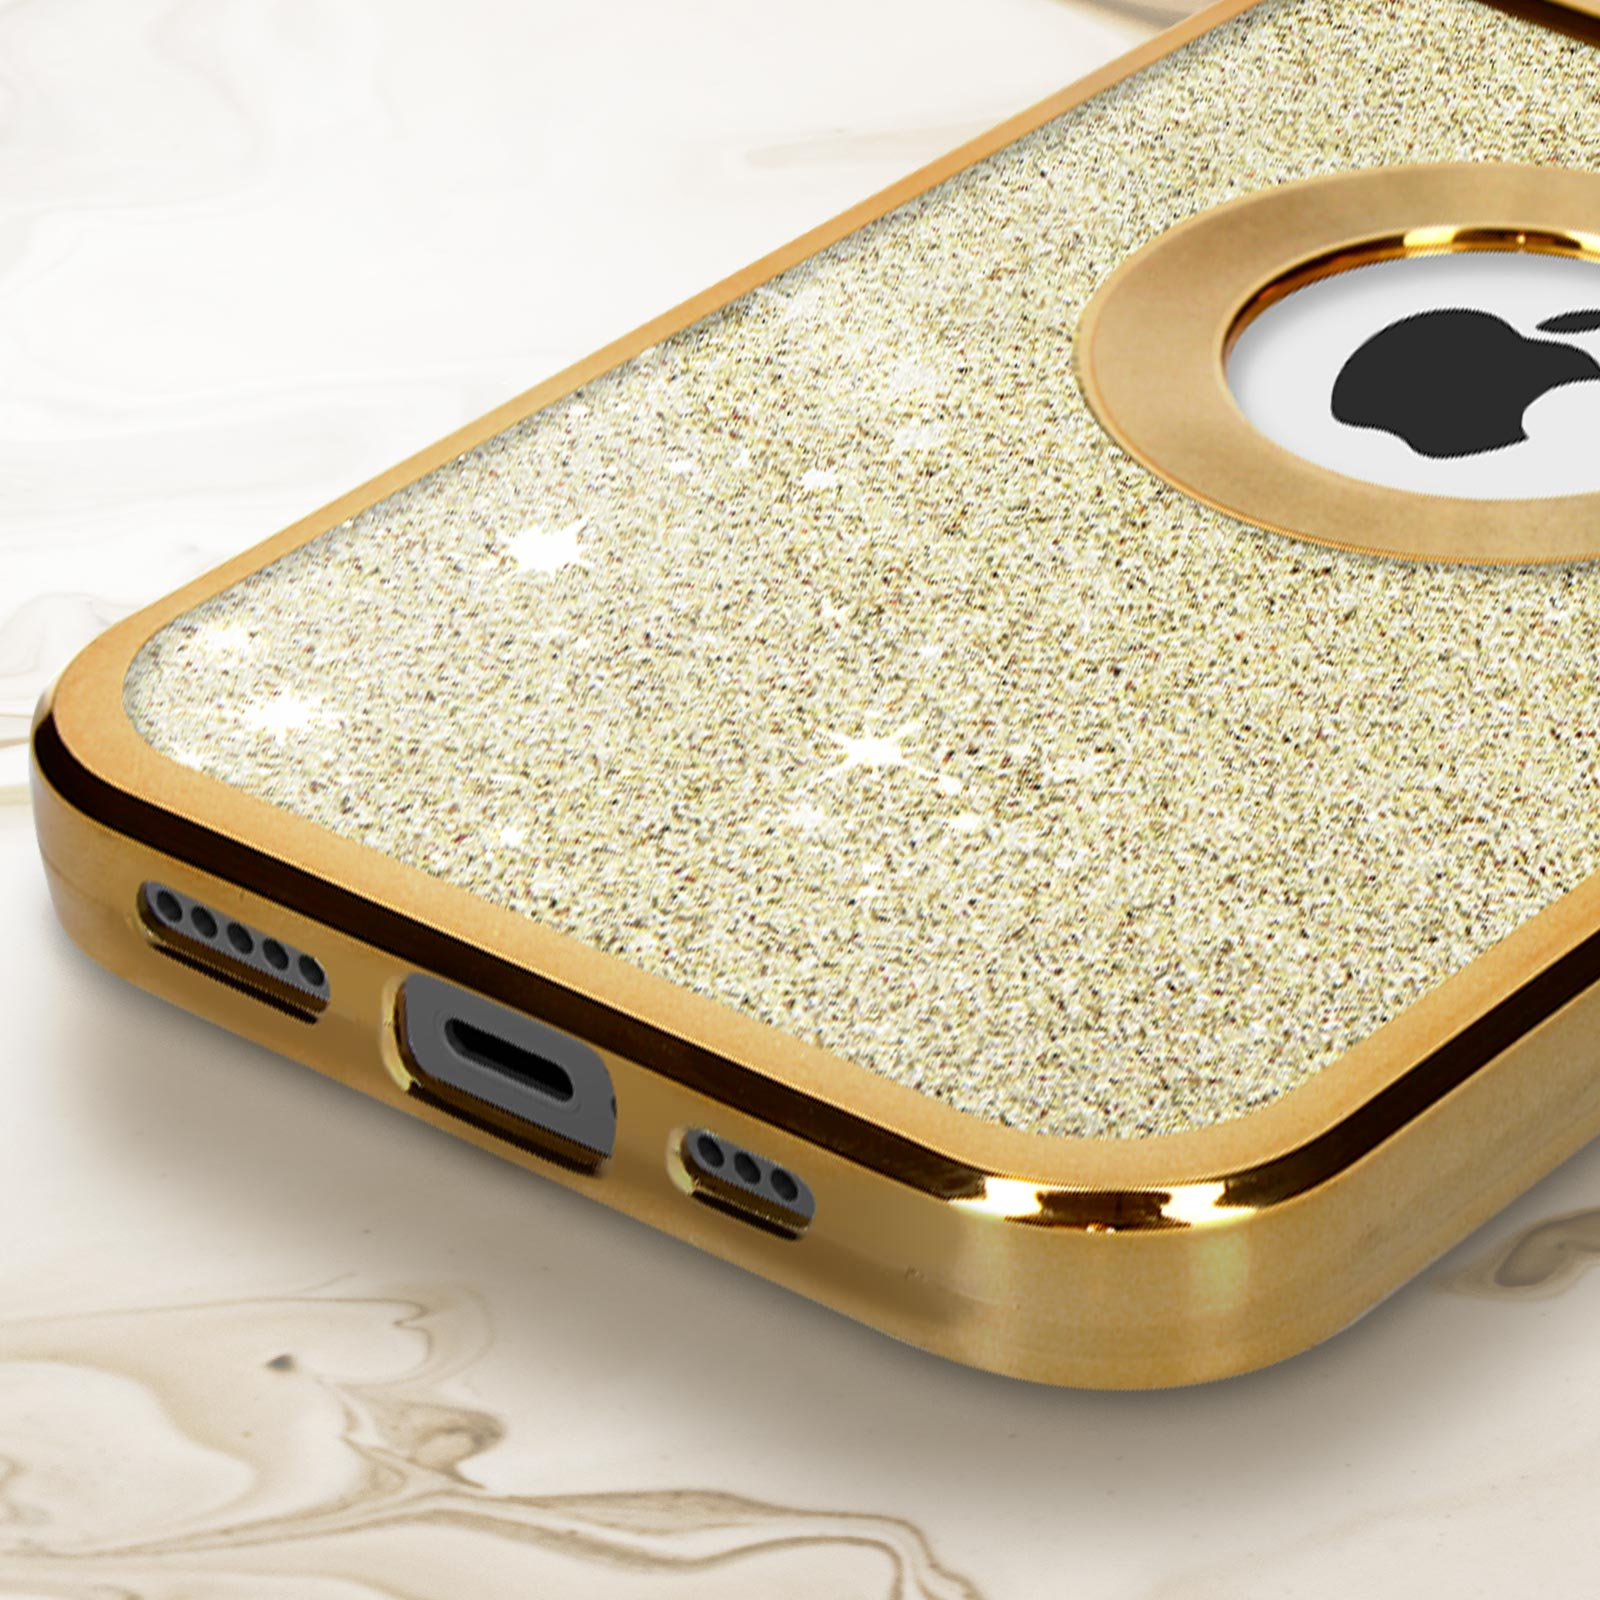 iPhone Apple, Gold Backcover, 12 Series, AVIZAR Spark Pro, Protecam